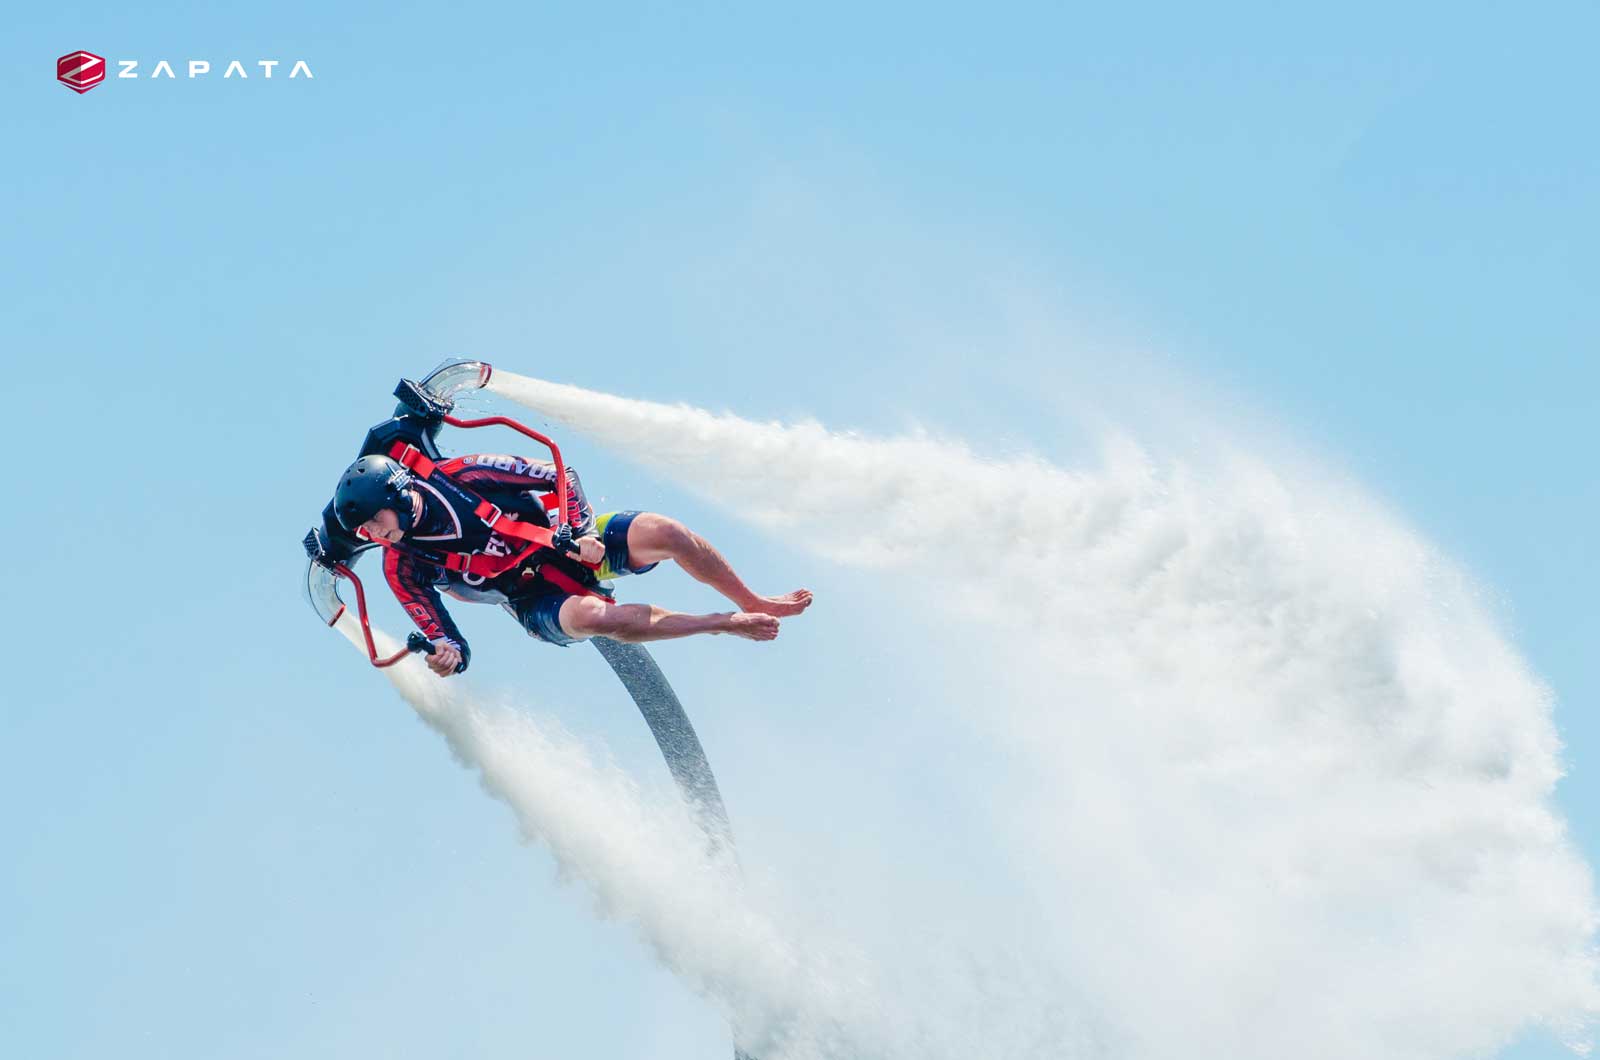 Jetpack, fly in air above watter - Zapata